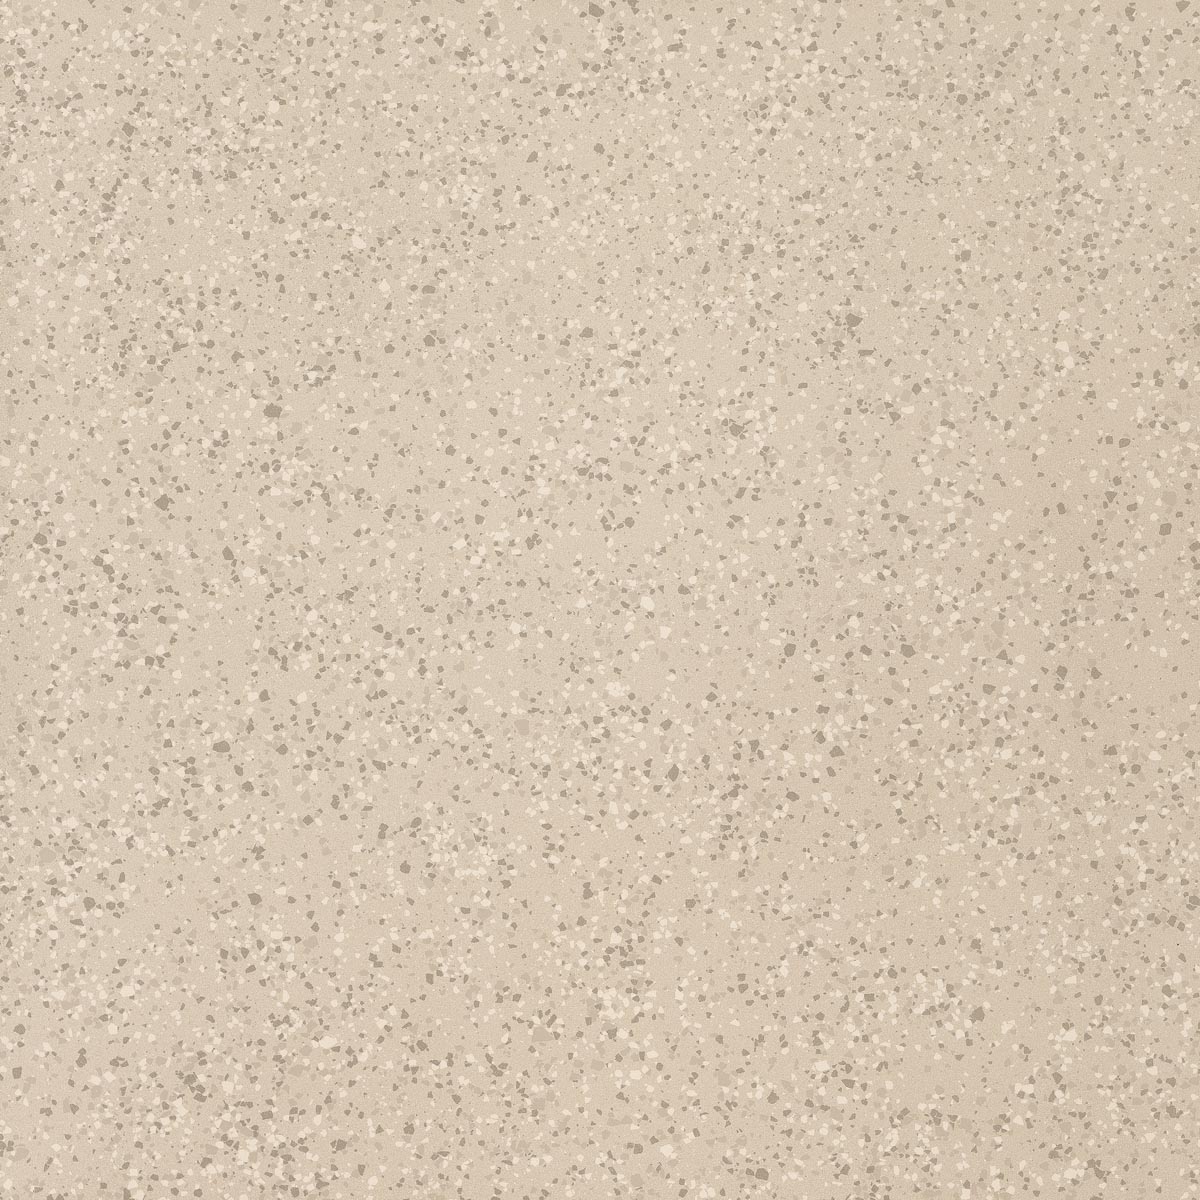 Imola Parade Almond Natural Flat Matt Outdoor 166103 120x120cm rectified 10,5mm - PRDE RB120A RM